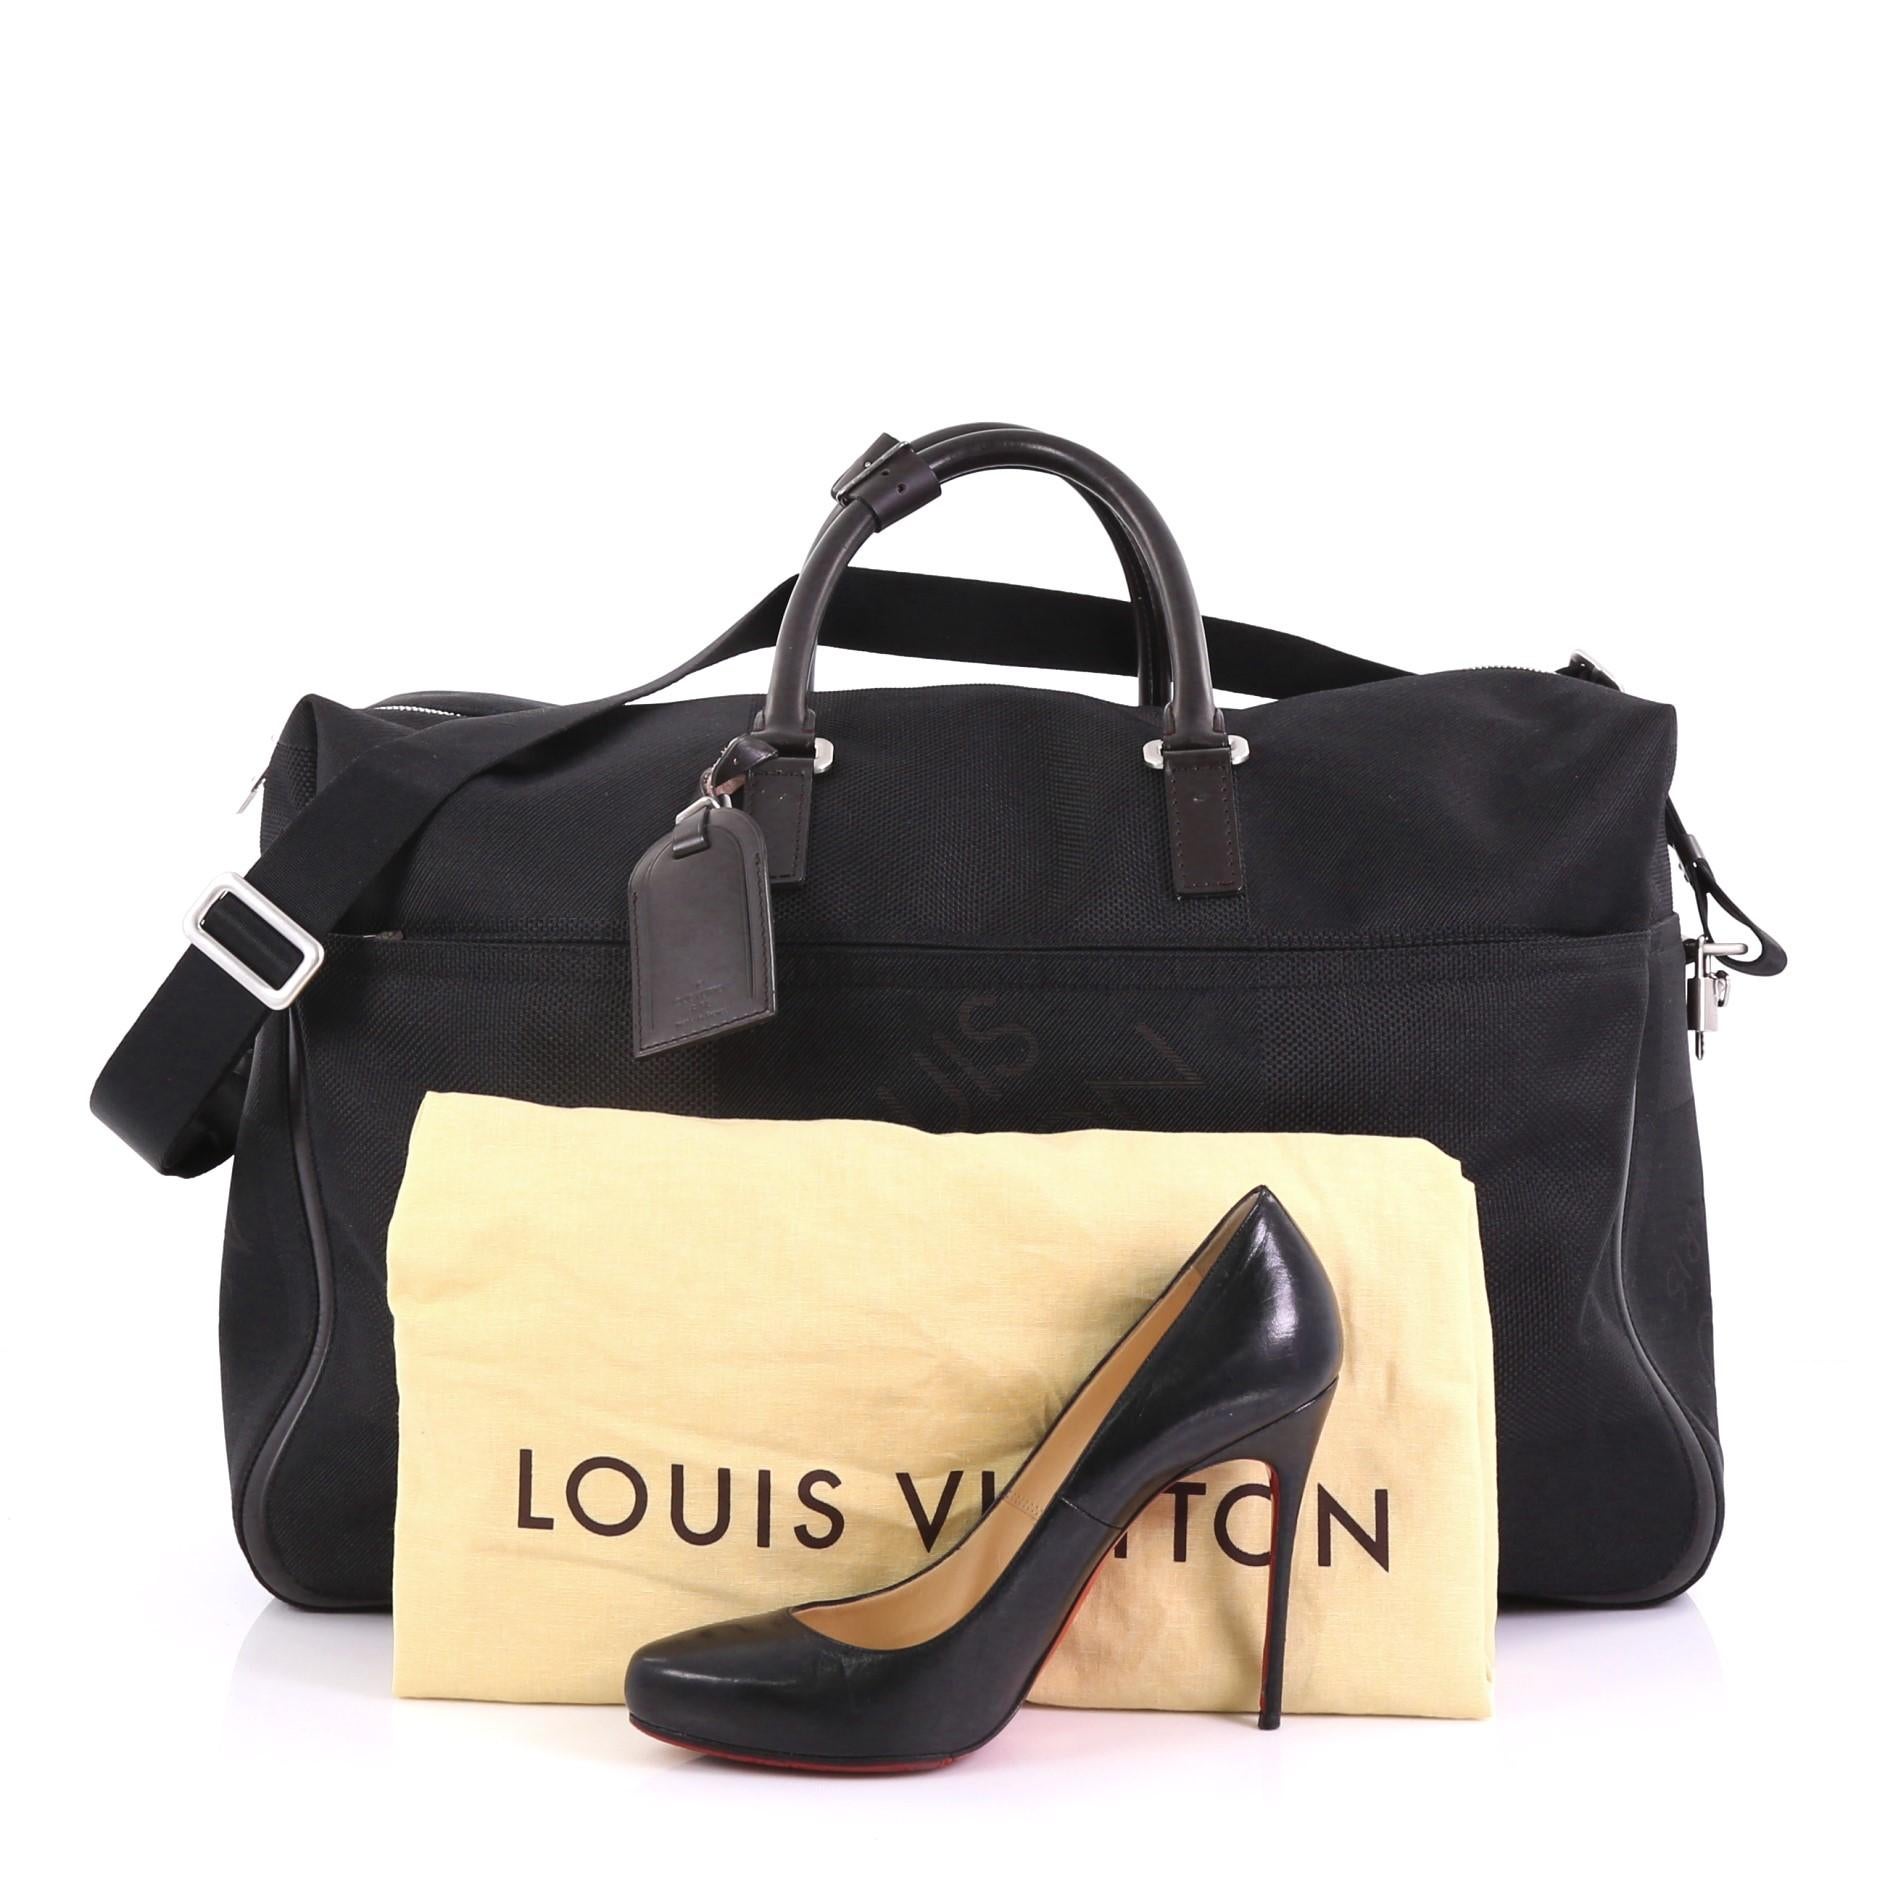 This Louis Vuitton Geant Albatros Duffle Bag Limited Edition Canvas, crafted from black damier geant canvas, features dual leather handles, leather trim, exterior front zip pocket, and silver-tone hardware. Its two-way zip closure opens to a brown